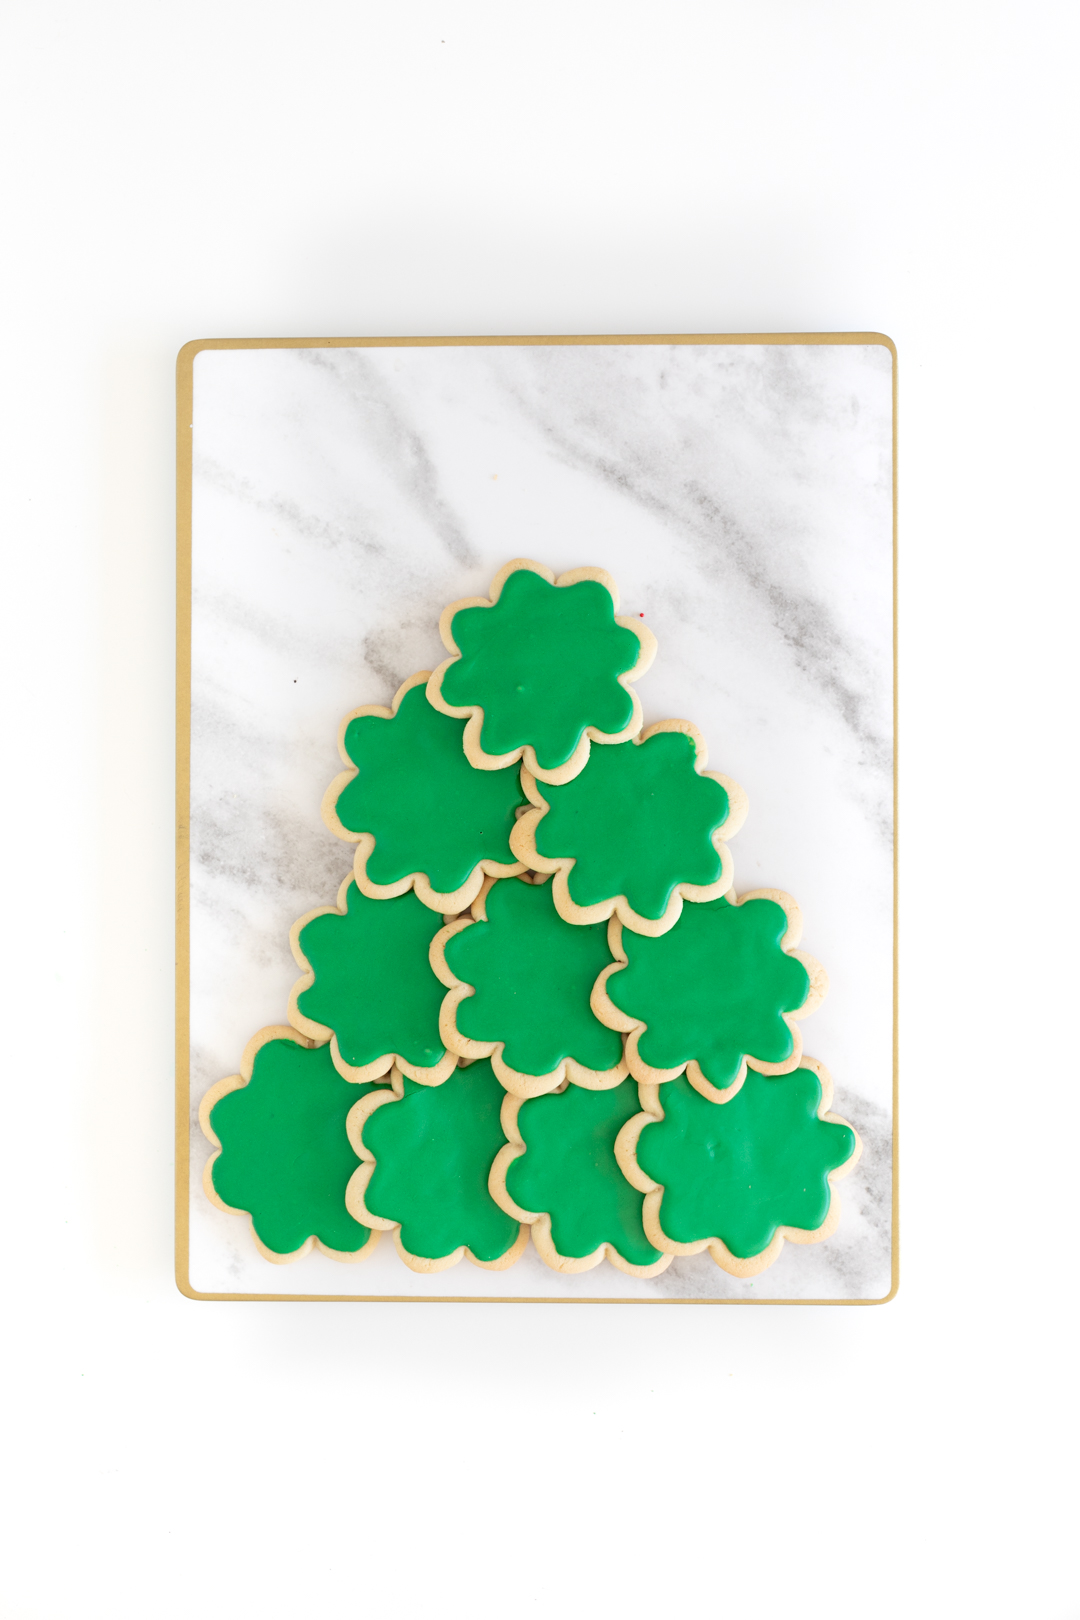 building a christmas tree platter using green frosted sugar cookies that were made with a flower shaped cookie cutter